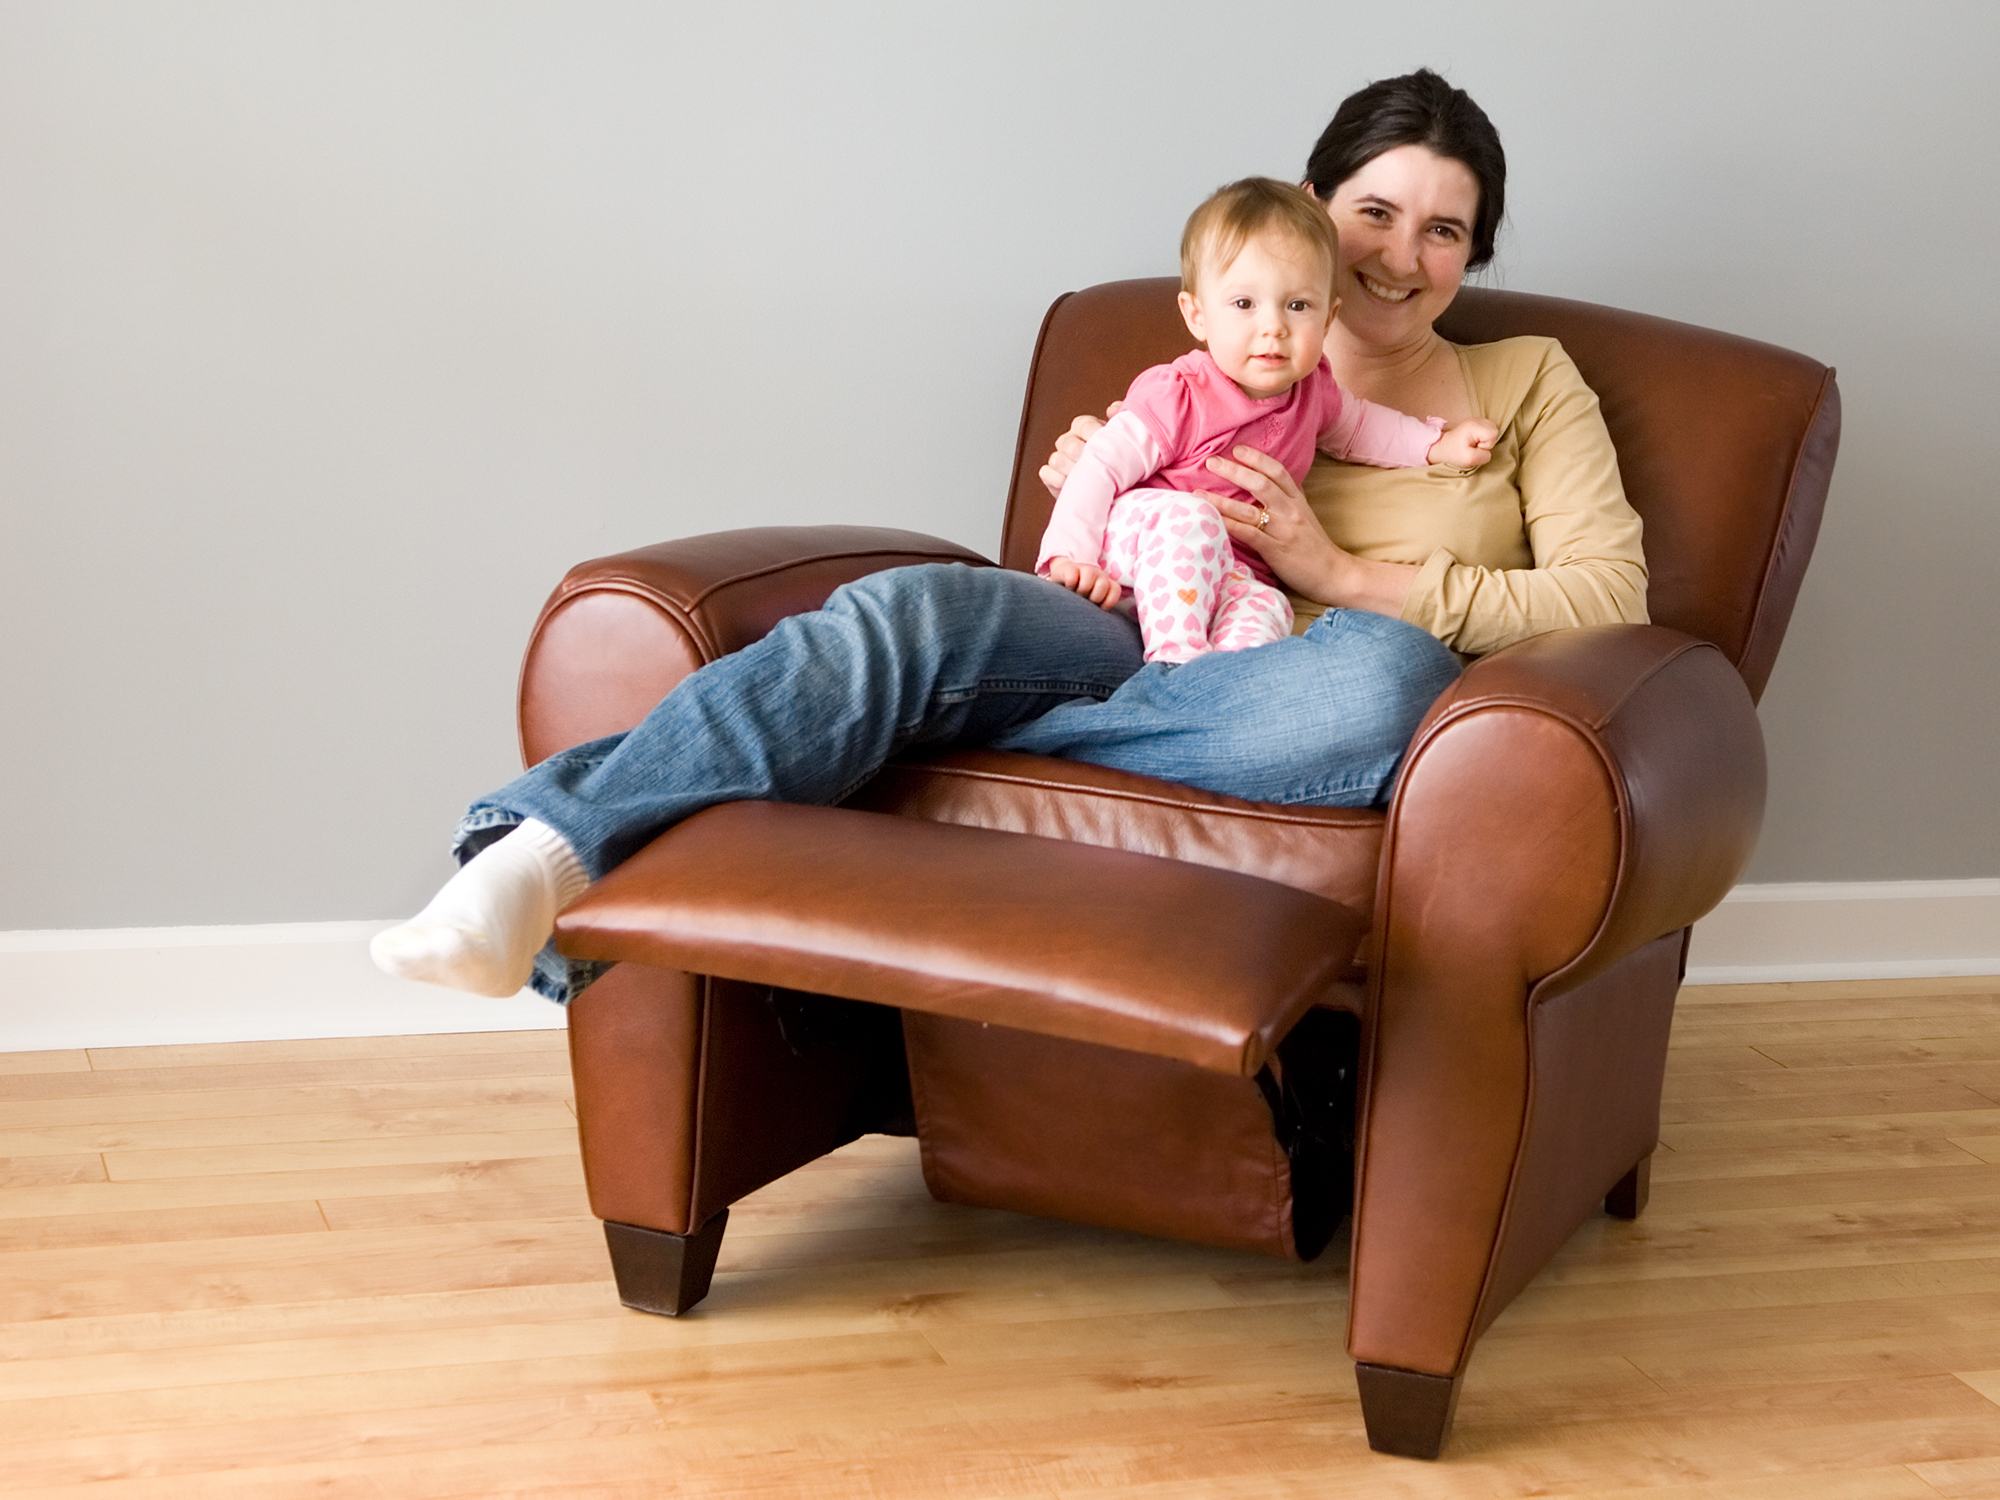 mother and child sitting in a recliner